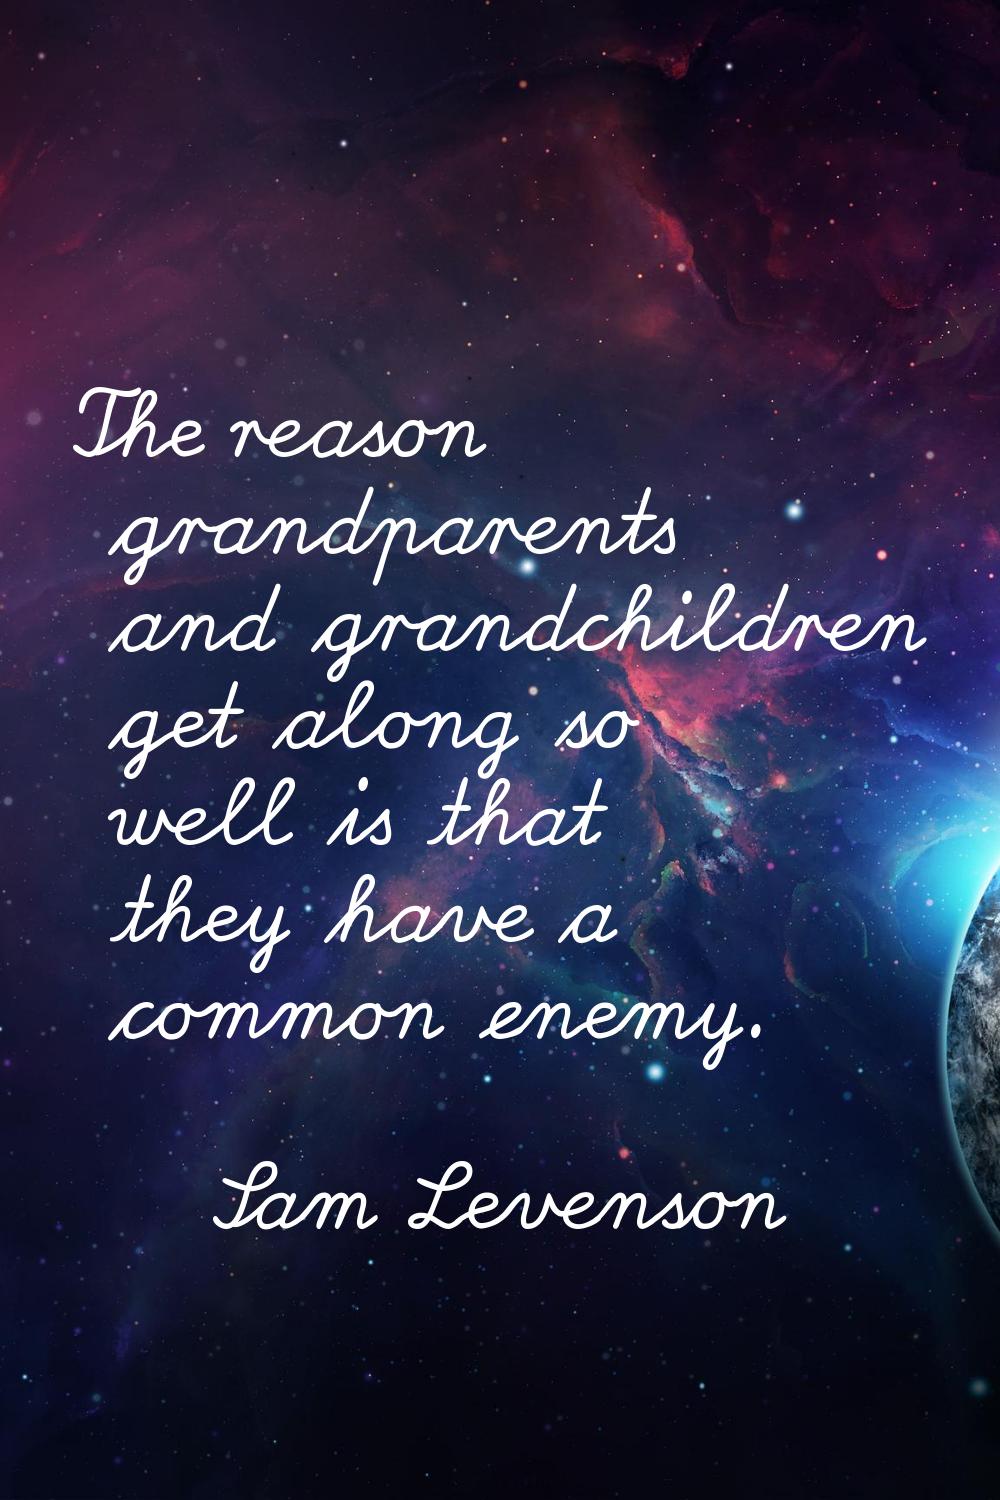 The reason grandparents and grandchildren get along so well is that they have a common enemy.